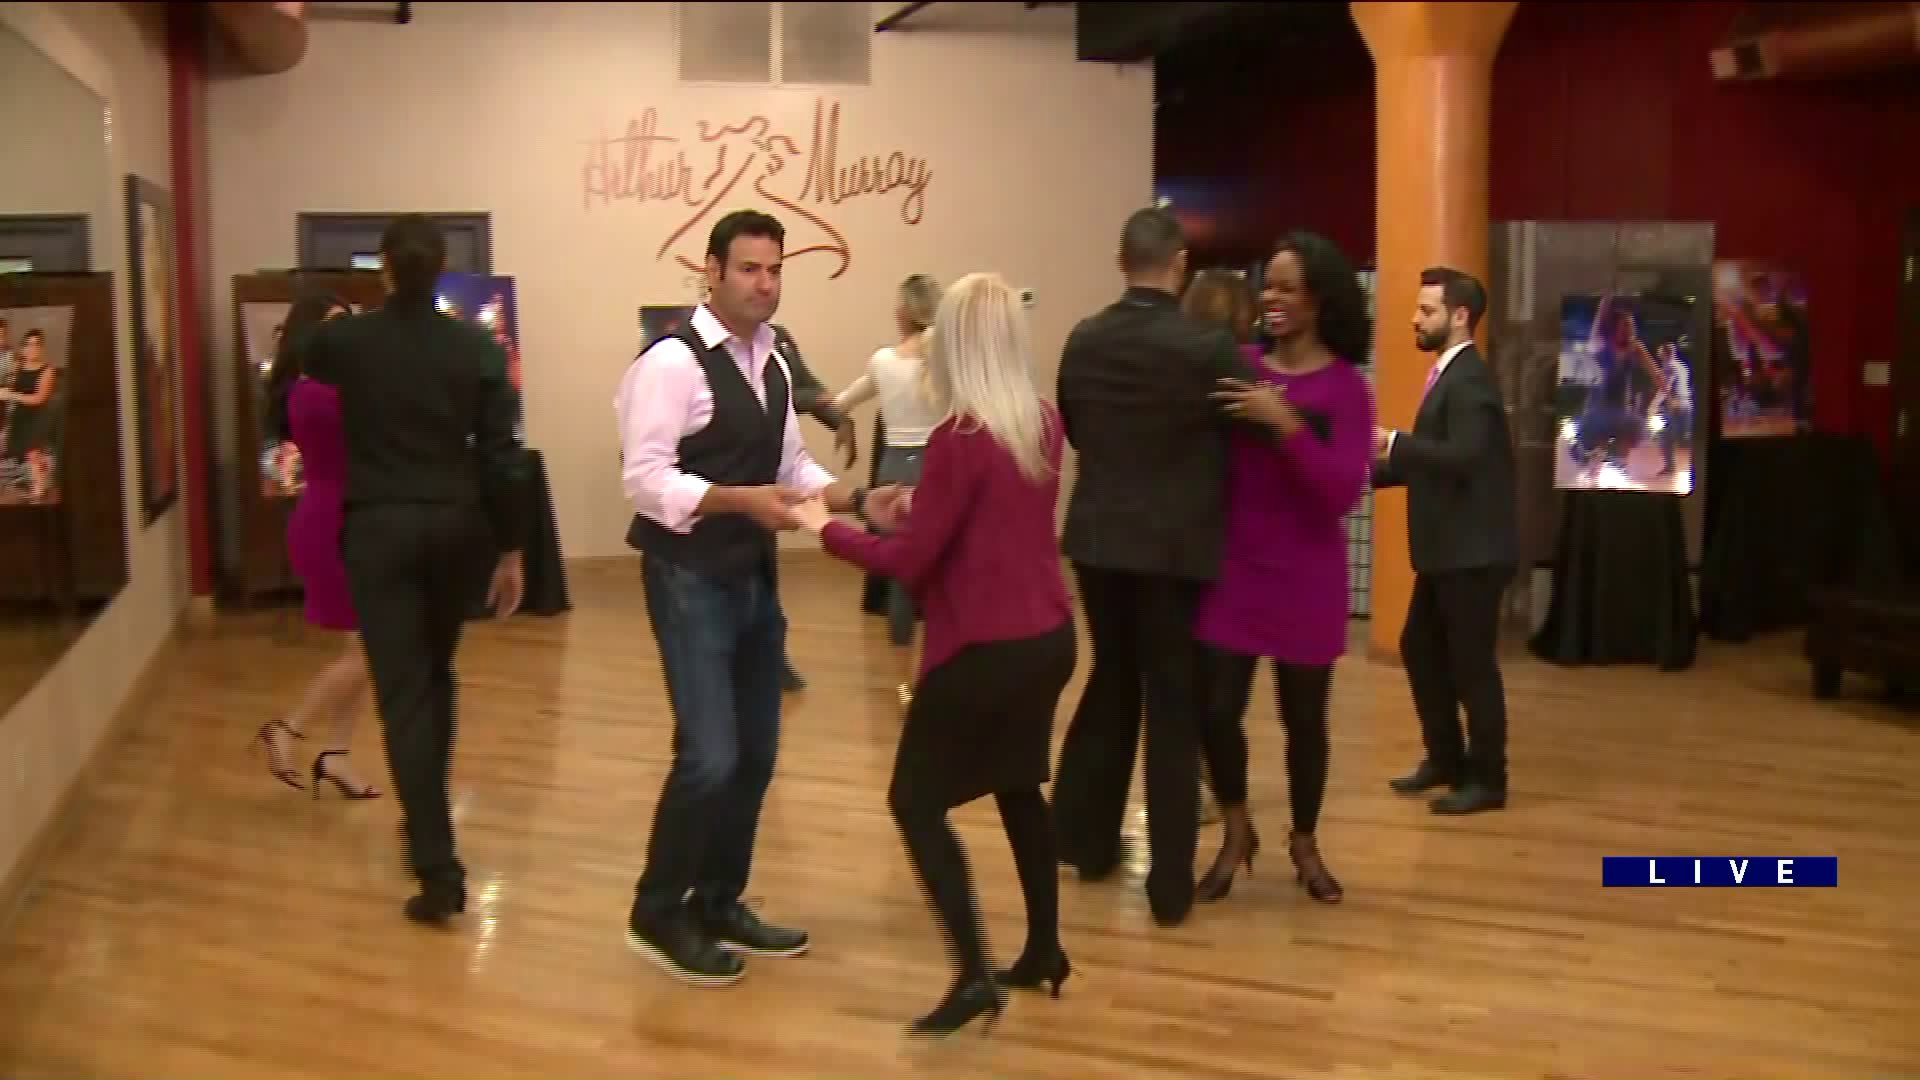 Around Town checks in with the dancers for the annual Dancing With Chicago Celebrities